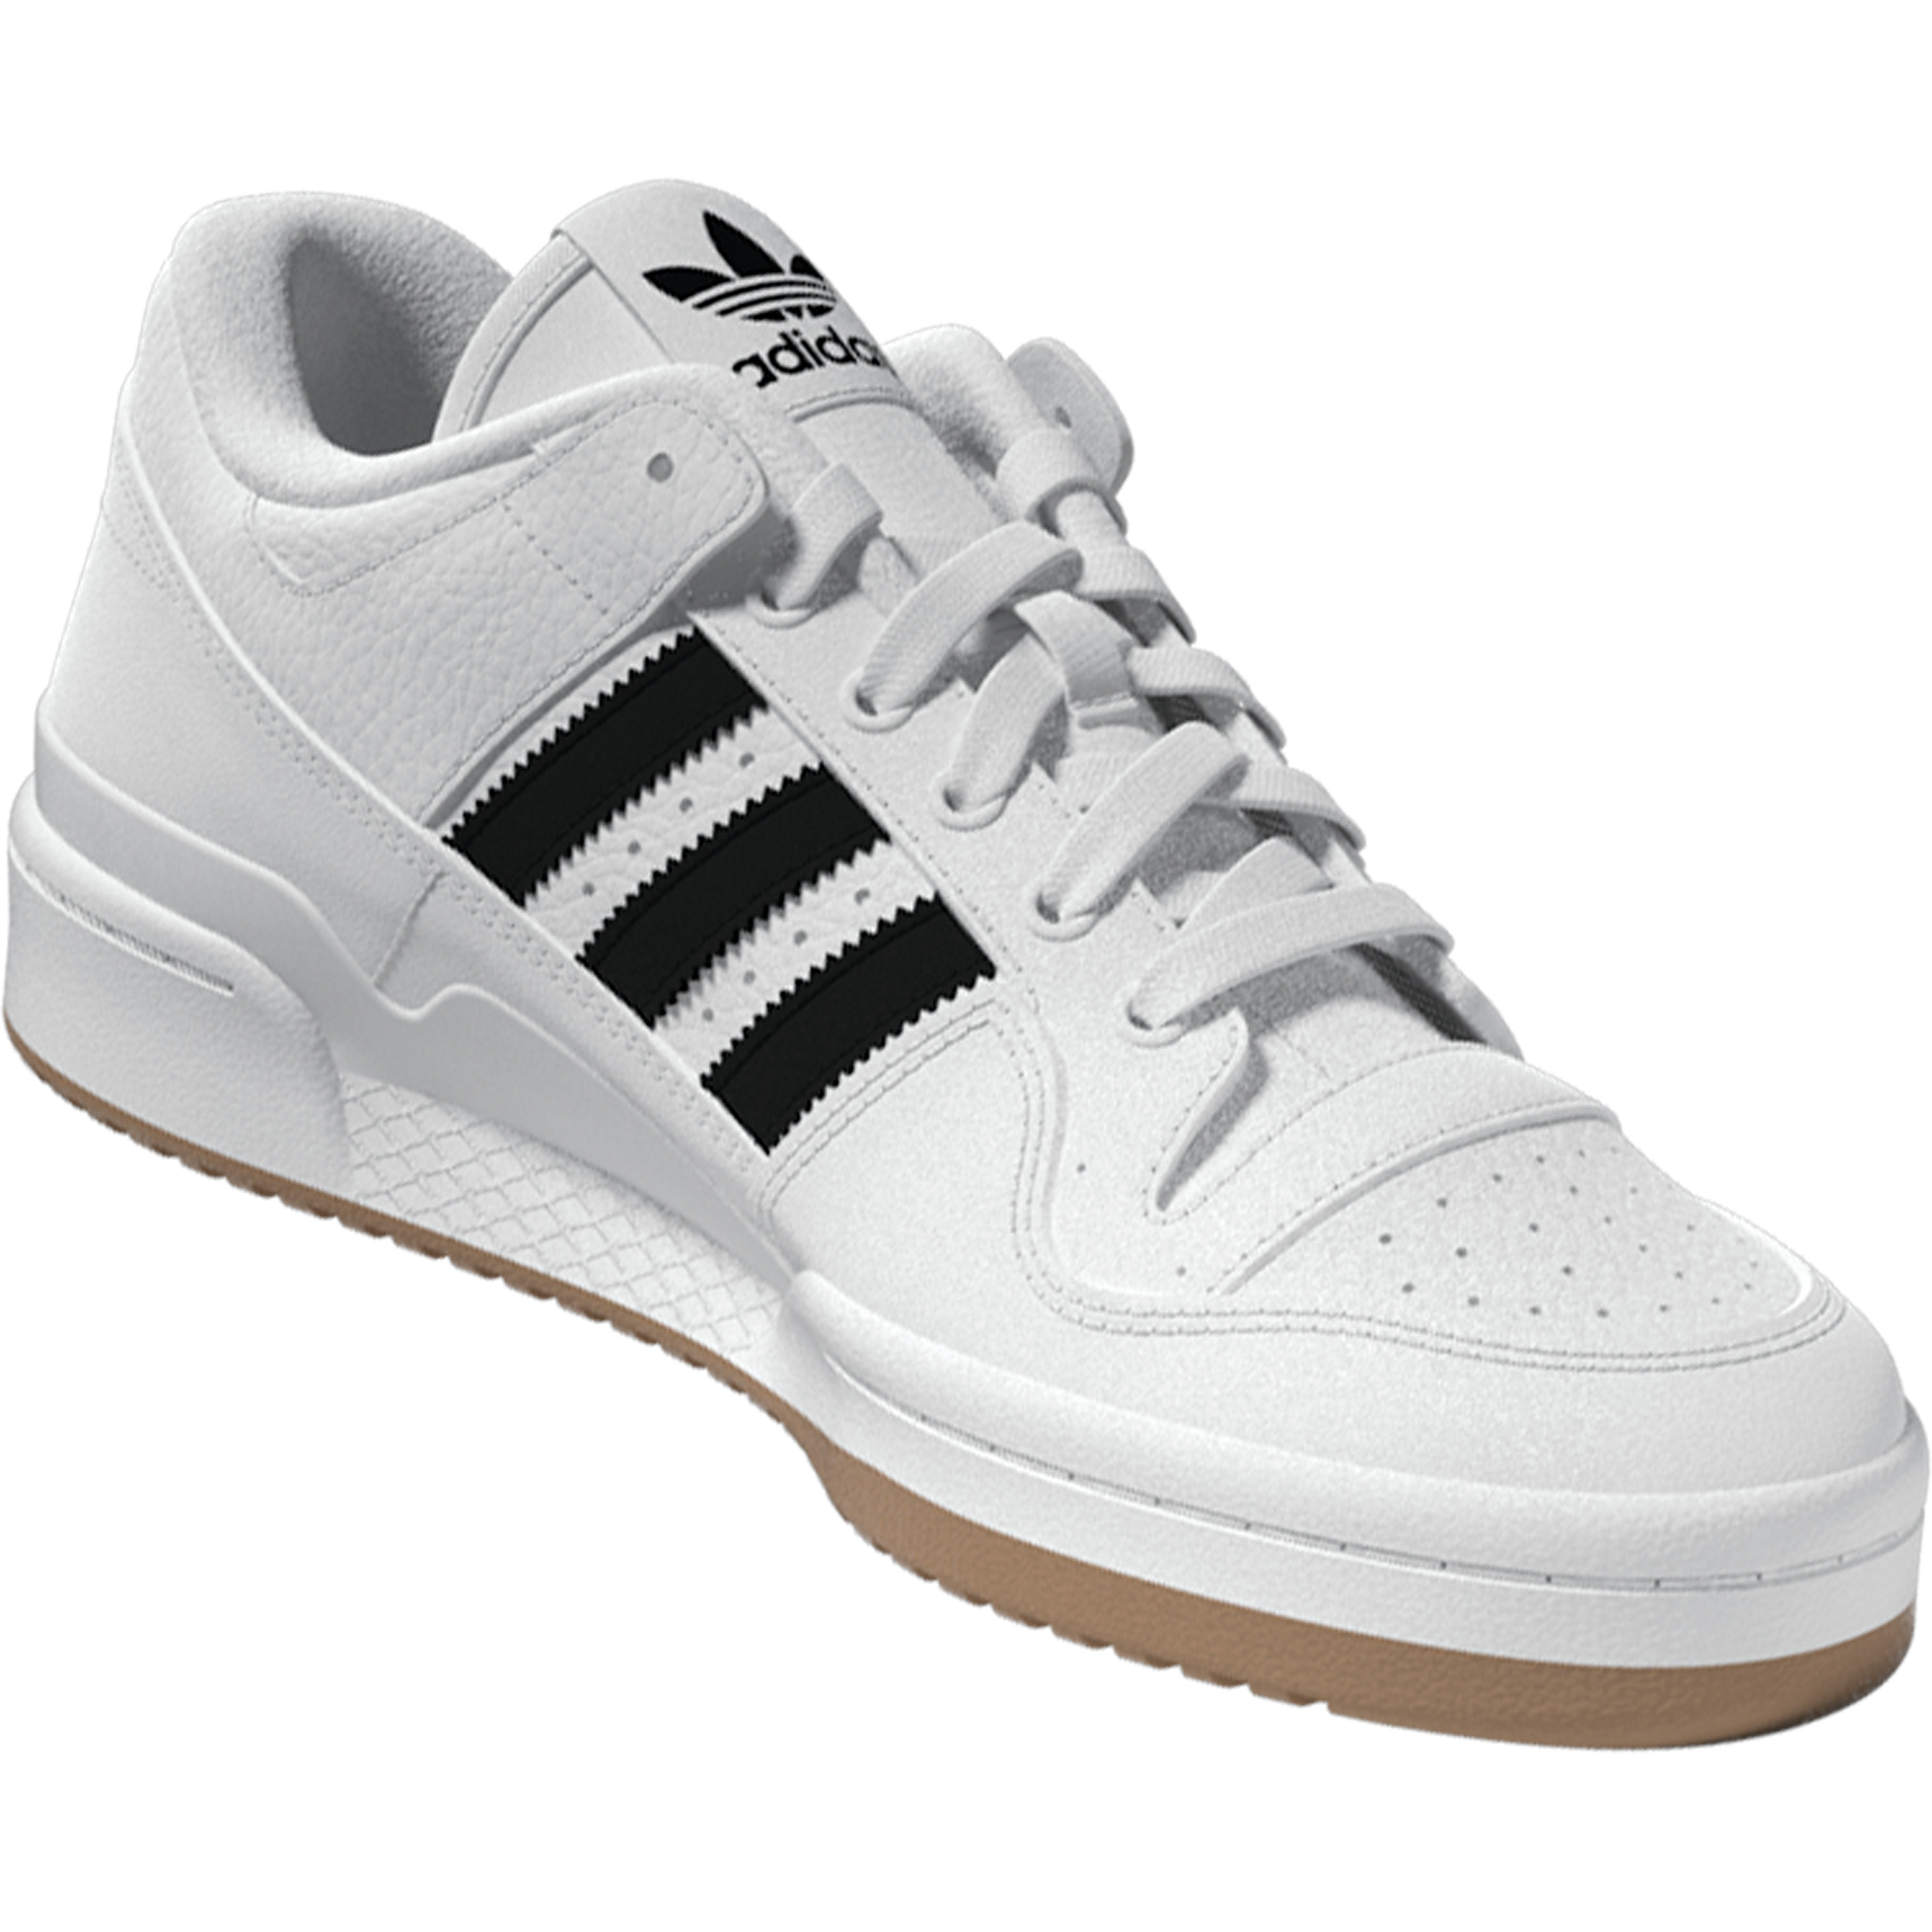 Adidas Forum 84 Low ADV Trainers/Skate Shoes